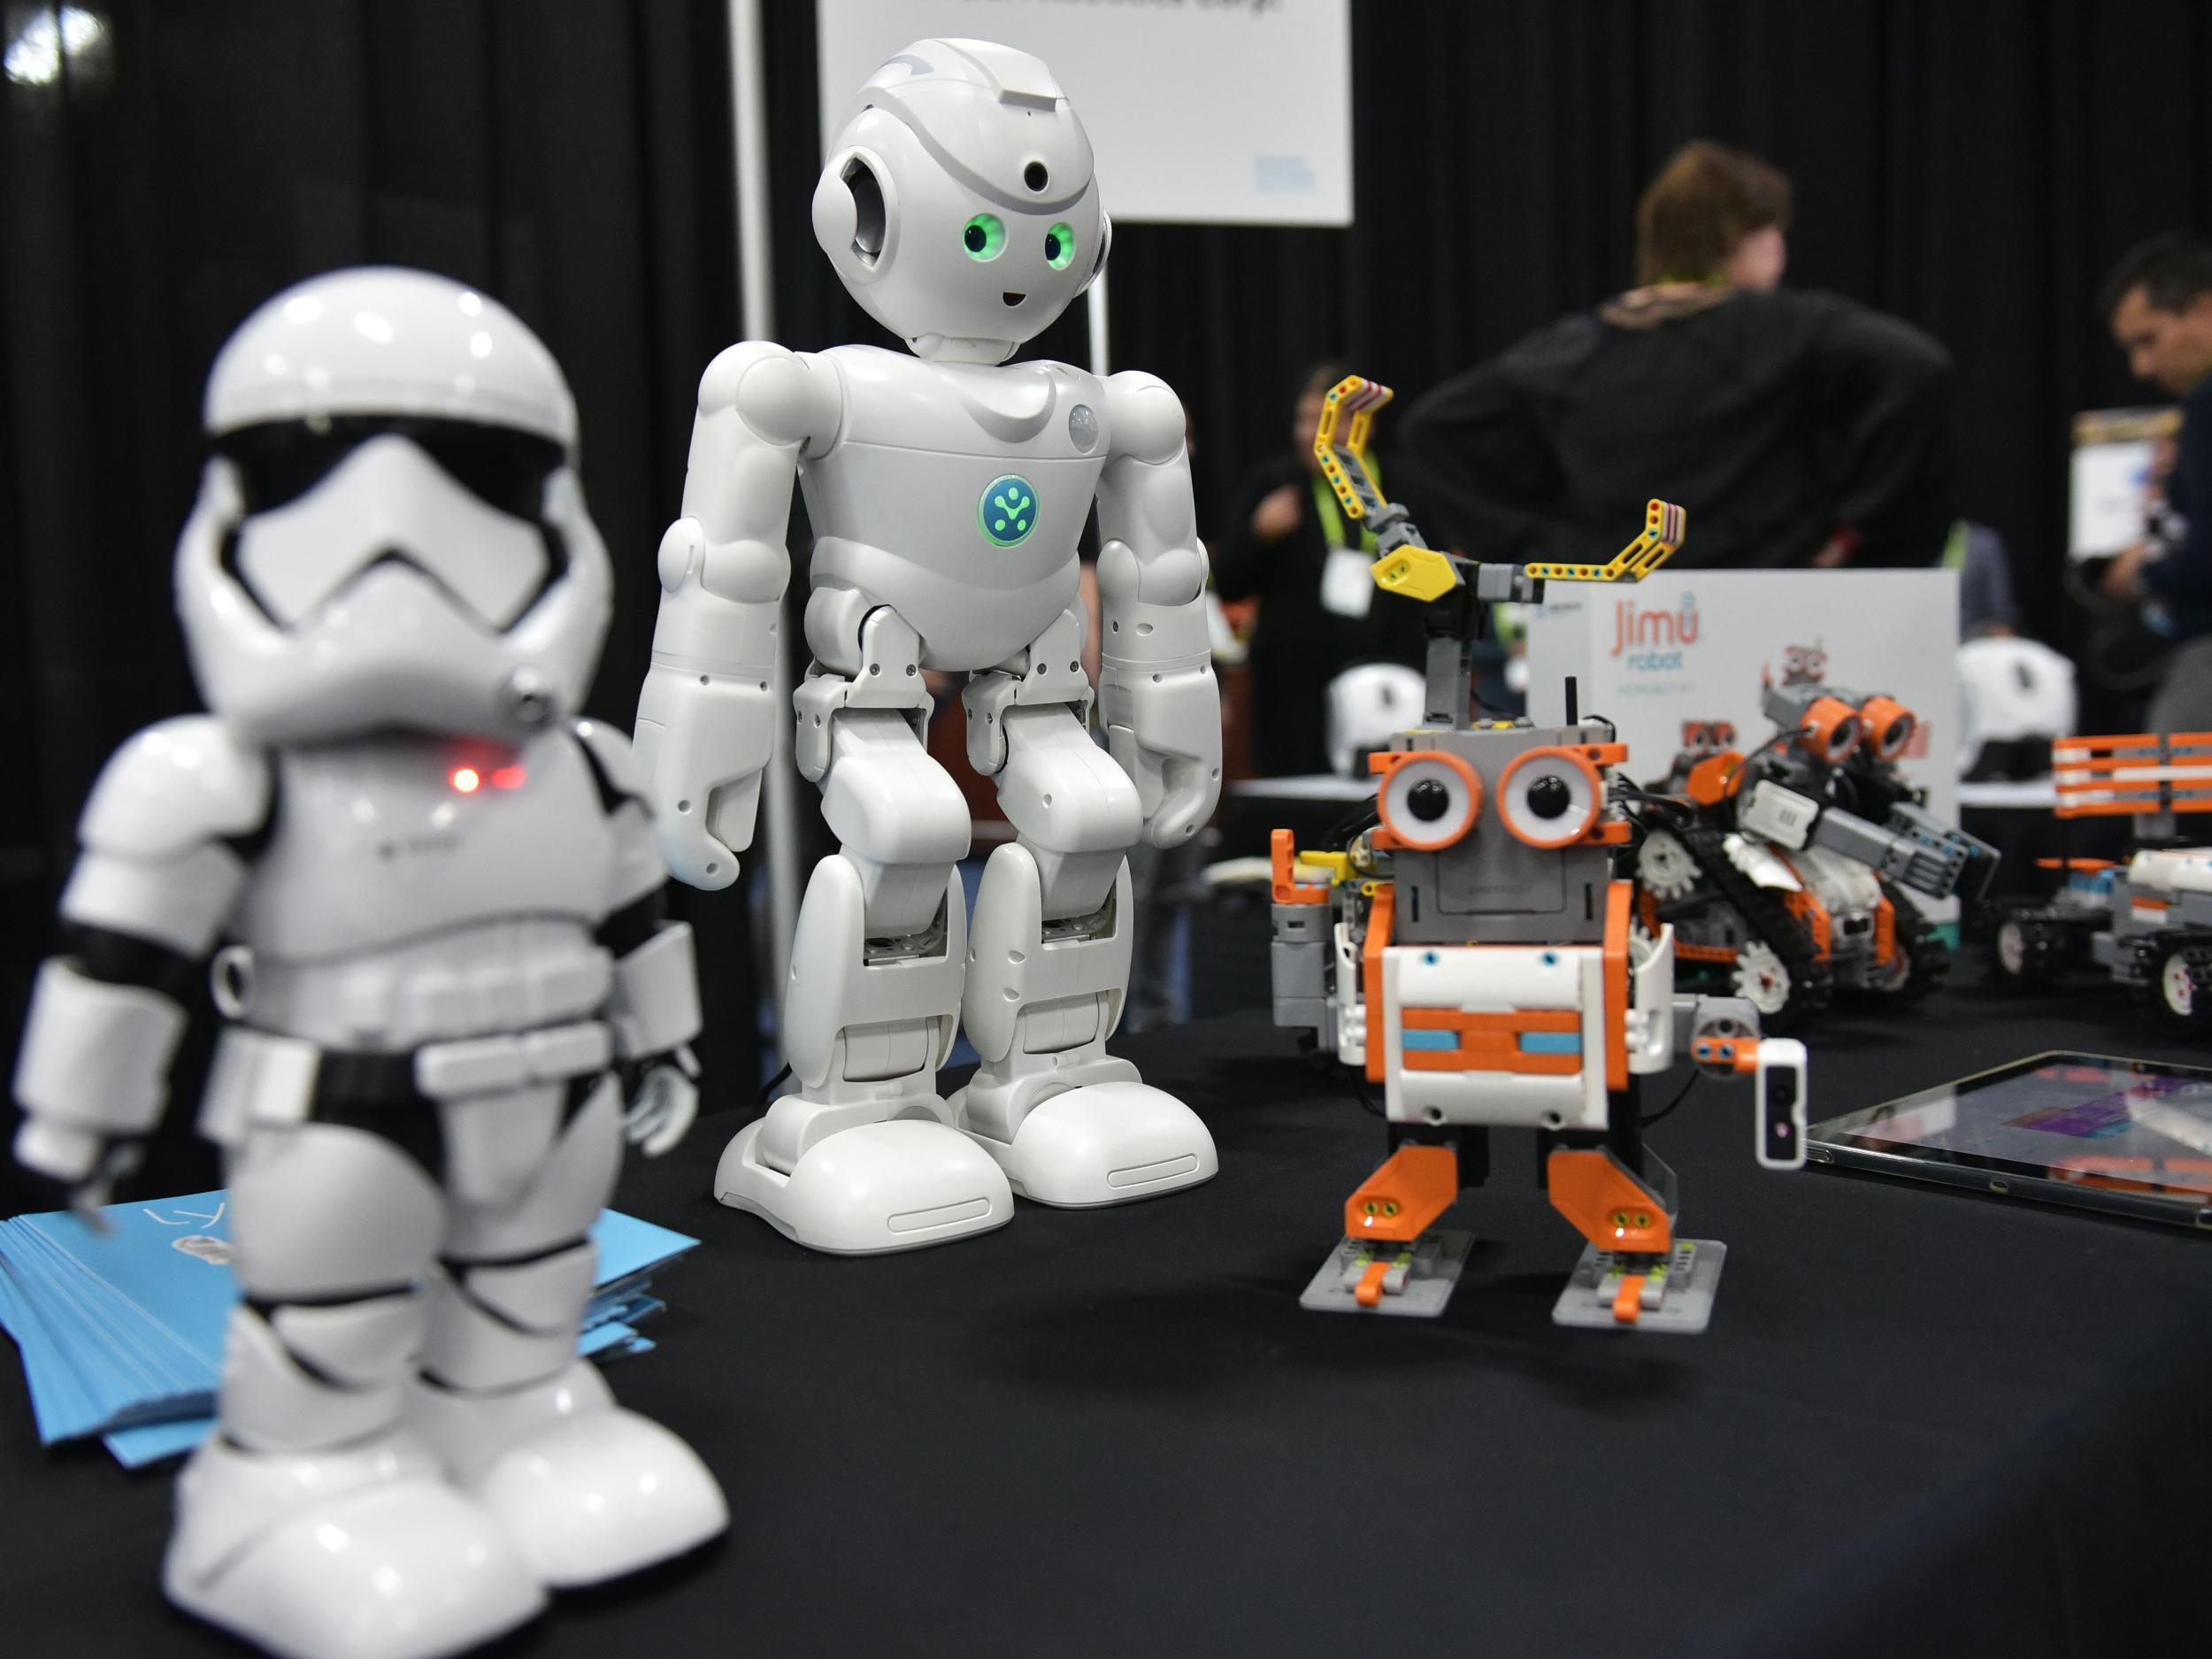 UBTECH robots including the First Order 'Stormtrooper' (L) and the Amazon Alexa voice assistant enabled 'lynx' (C) are seen during the CES Unveiled preview event at the Mandalay Bay Convention Center during CES 2018 in Las Vegas on January 7, 2018